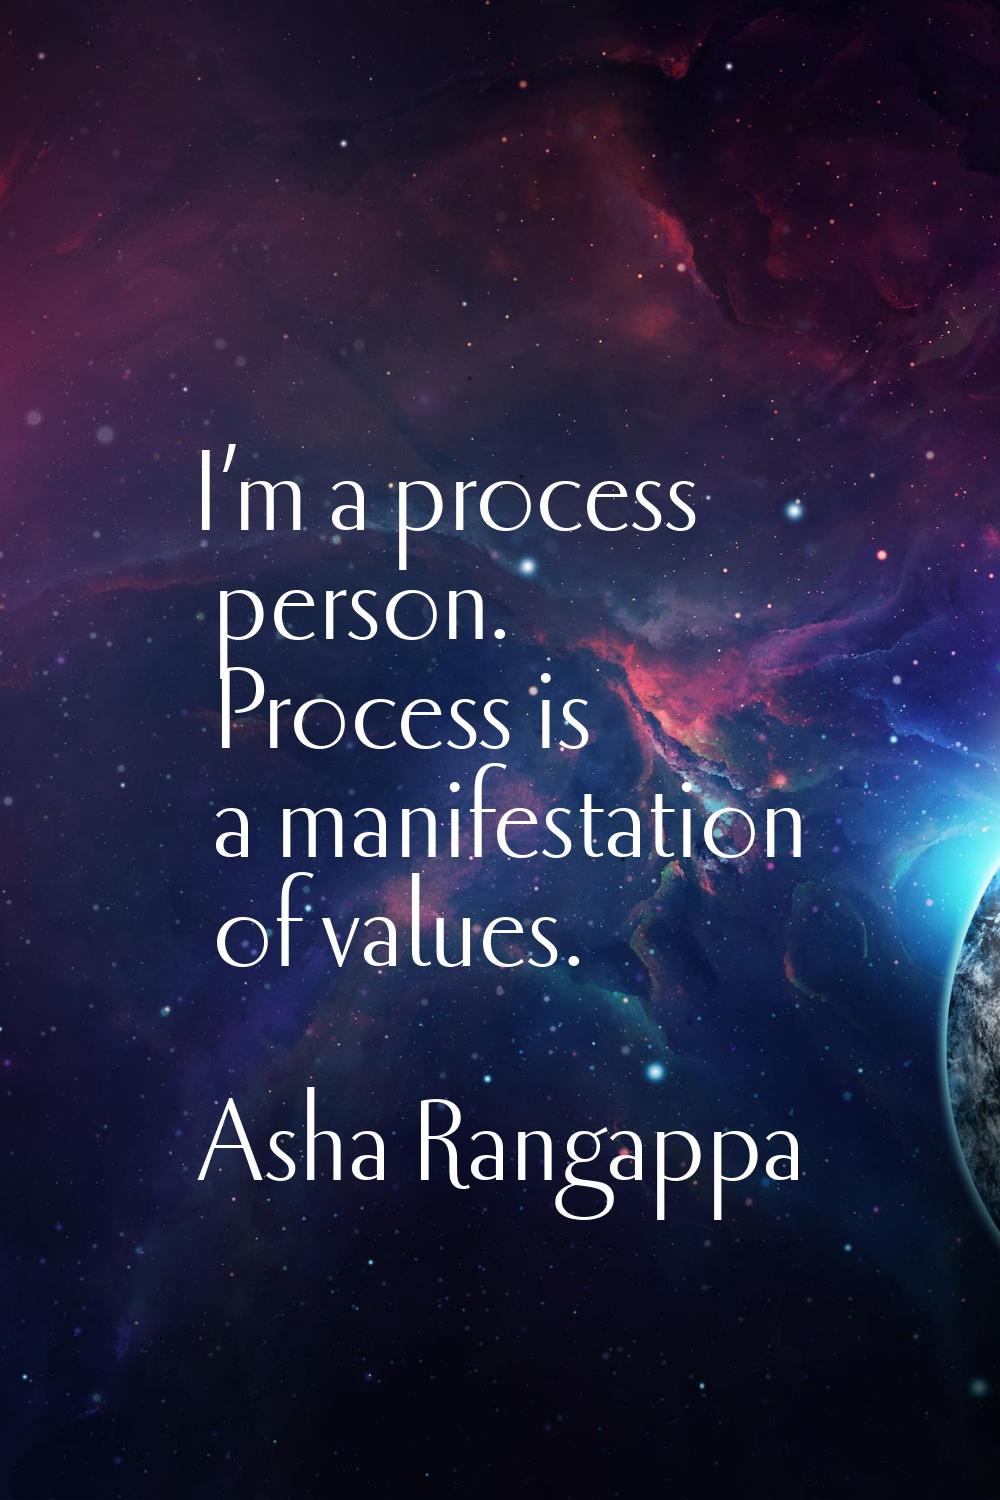 I’m a process person. Process is a manifestation of values.